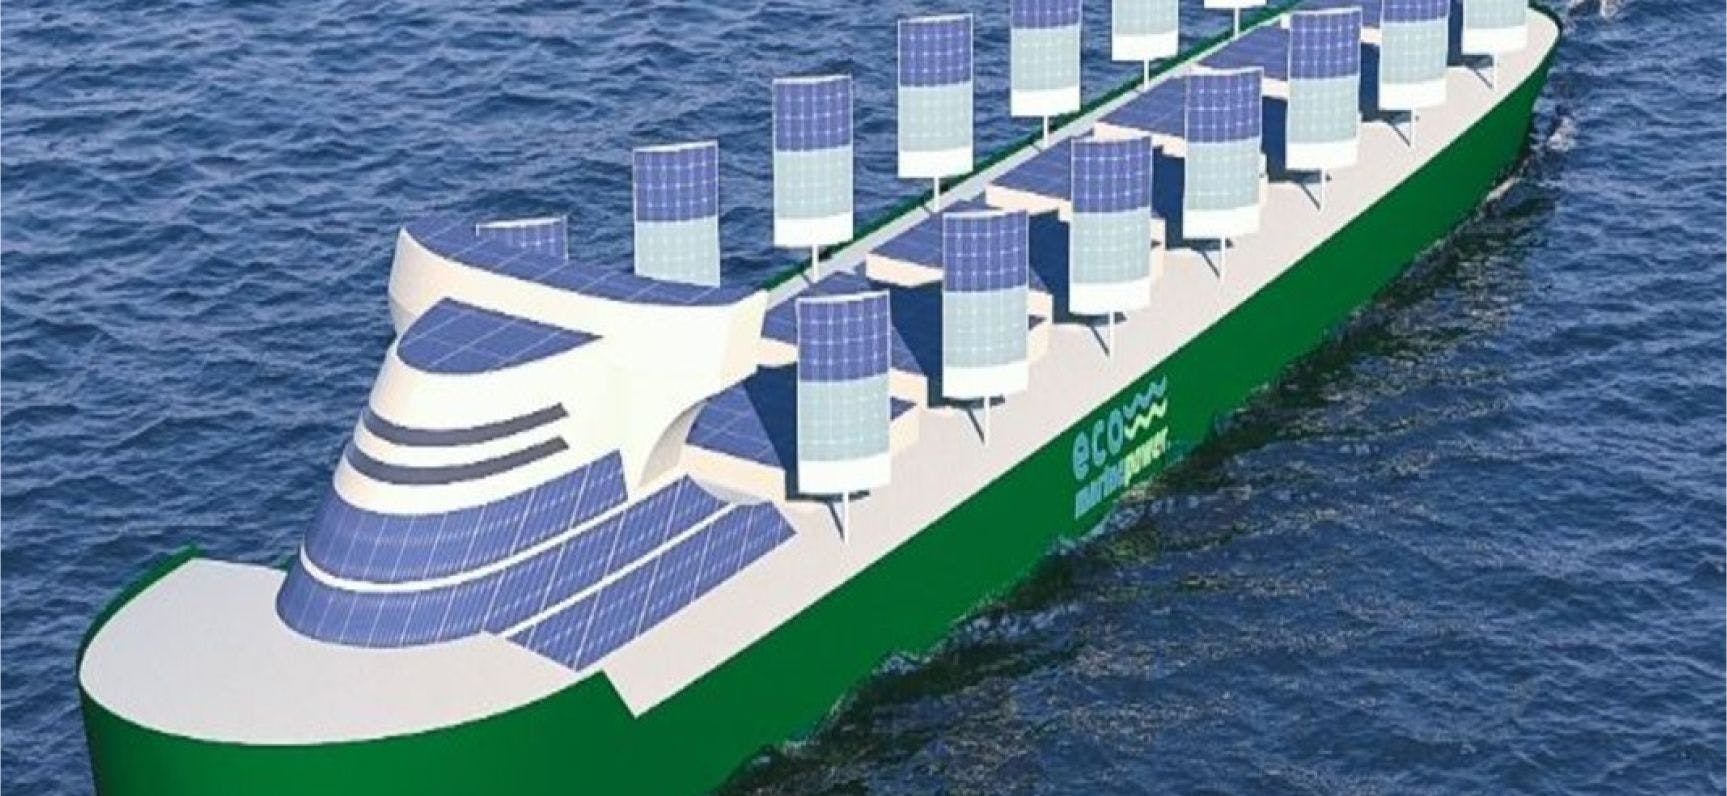 Sustainable shipping